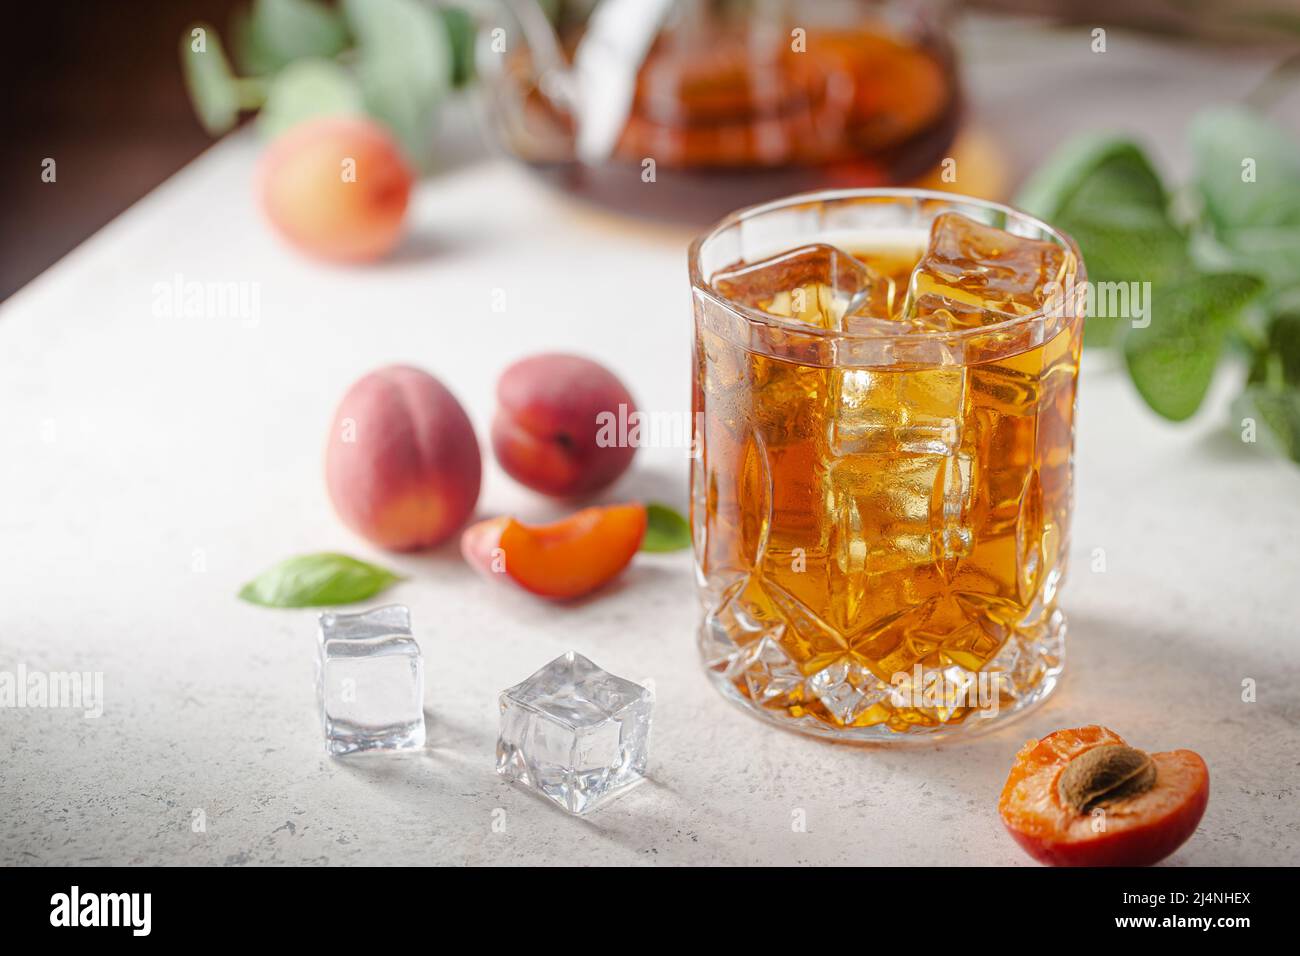 https://c8.alamy.com/comp/2J4NHEX/glass-of-peach-or-apricot-iced-tea-with-fruit-slices-against-white-background-2J4NHEX.jpg